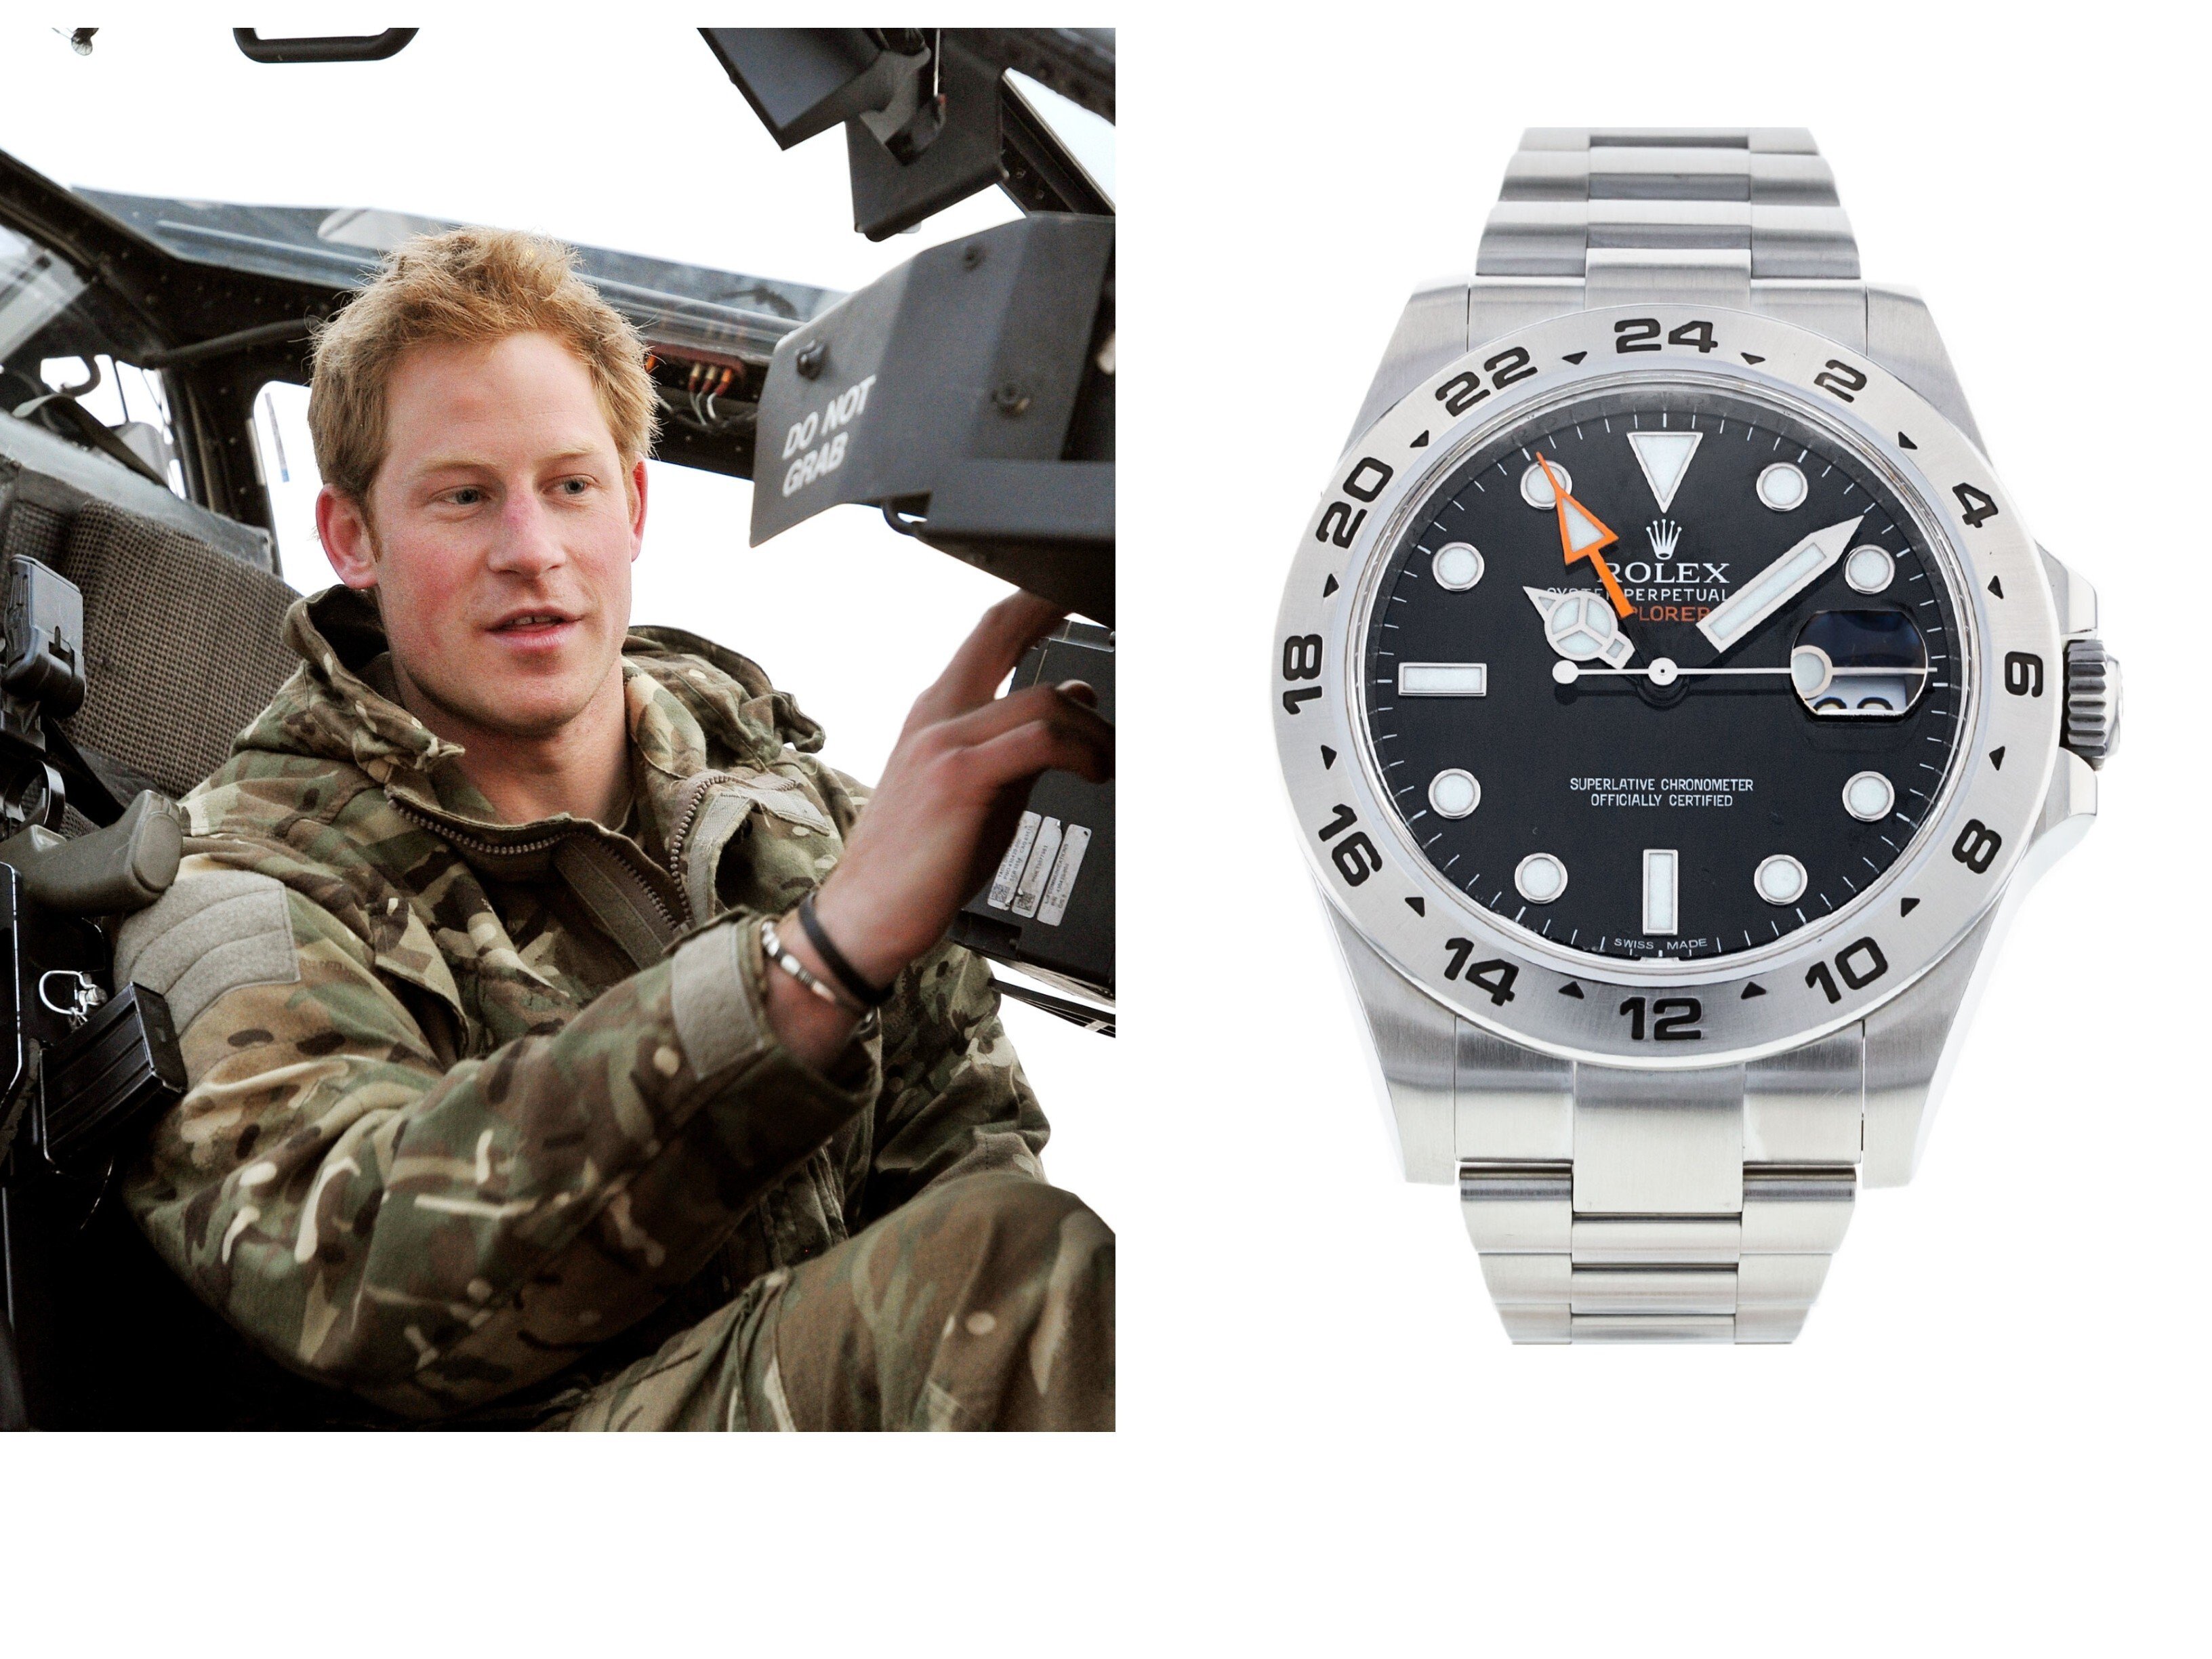 Prince Harry's military Rolex 